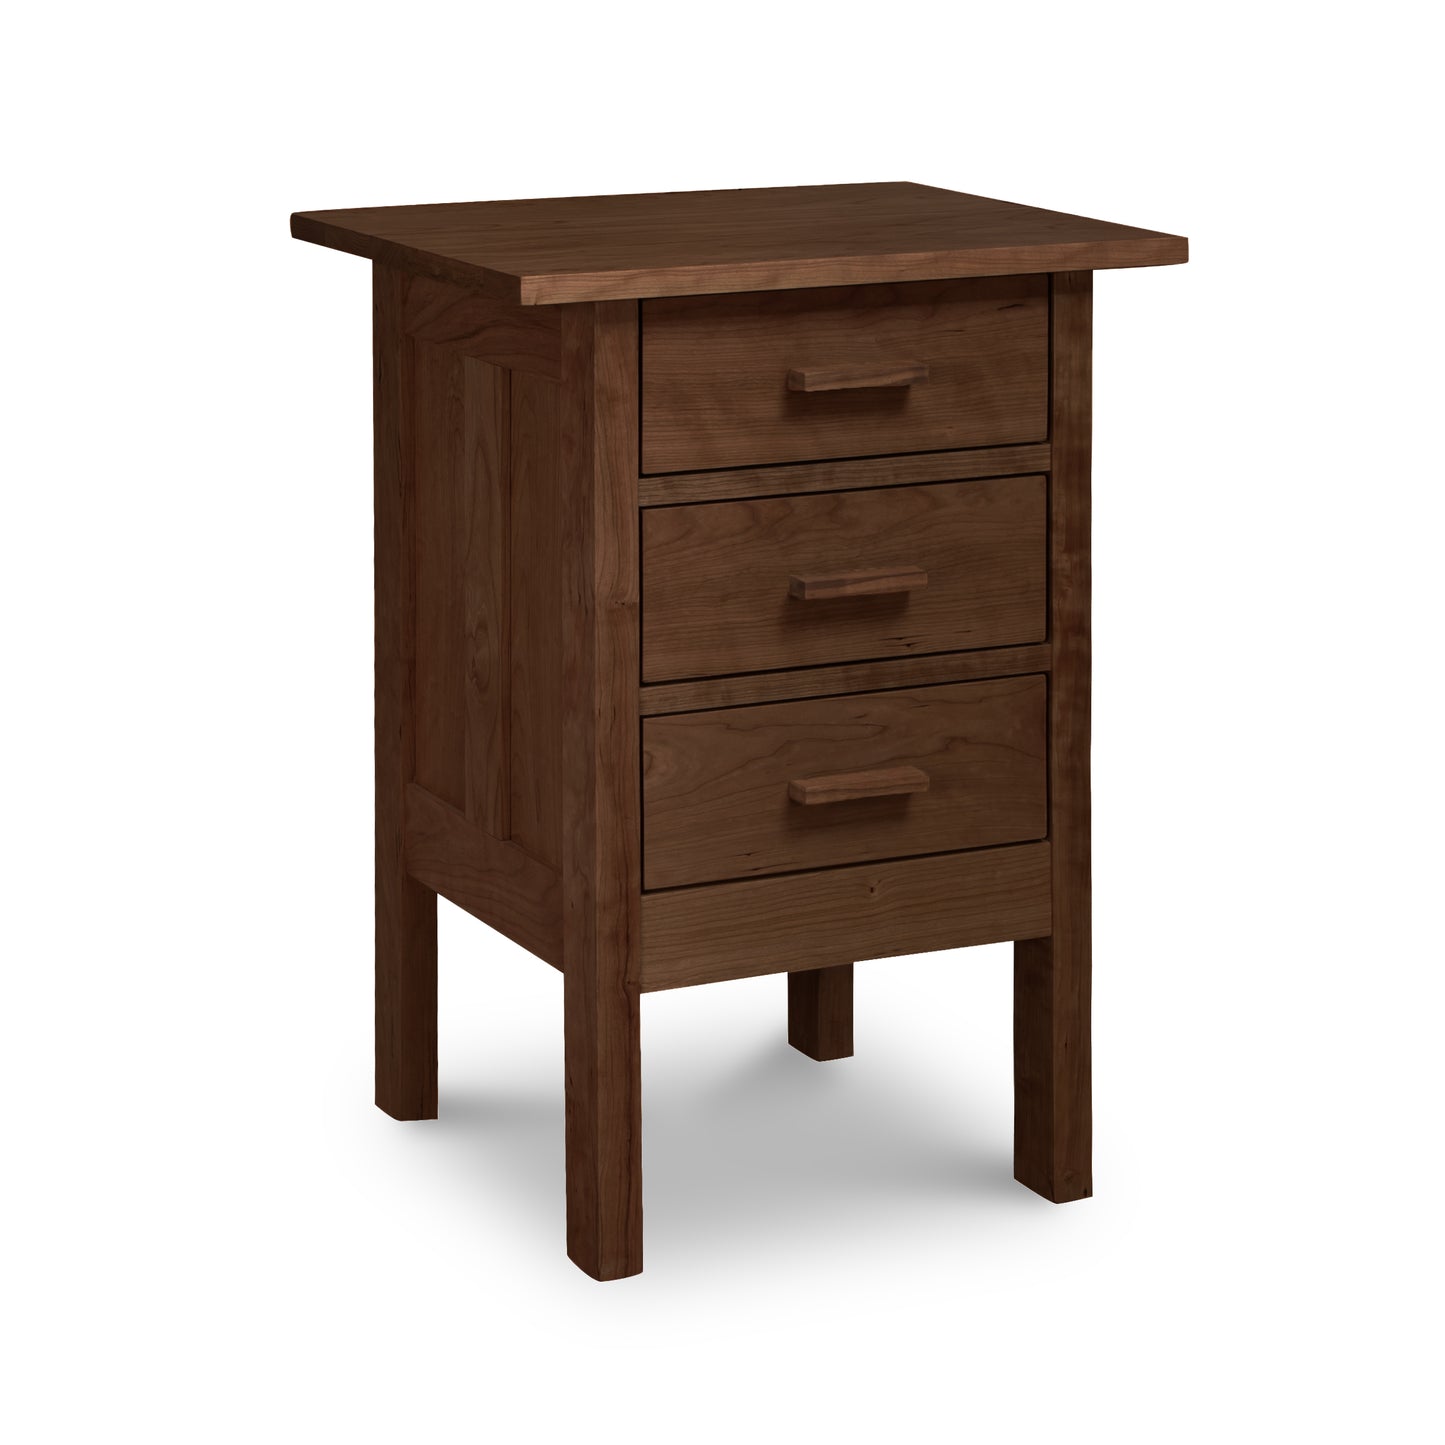 A Modern Craftsman 3-Drawer Nightstand by Vermont Furniture Designs with three drawers on a white background.